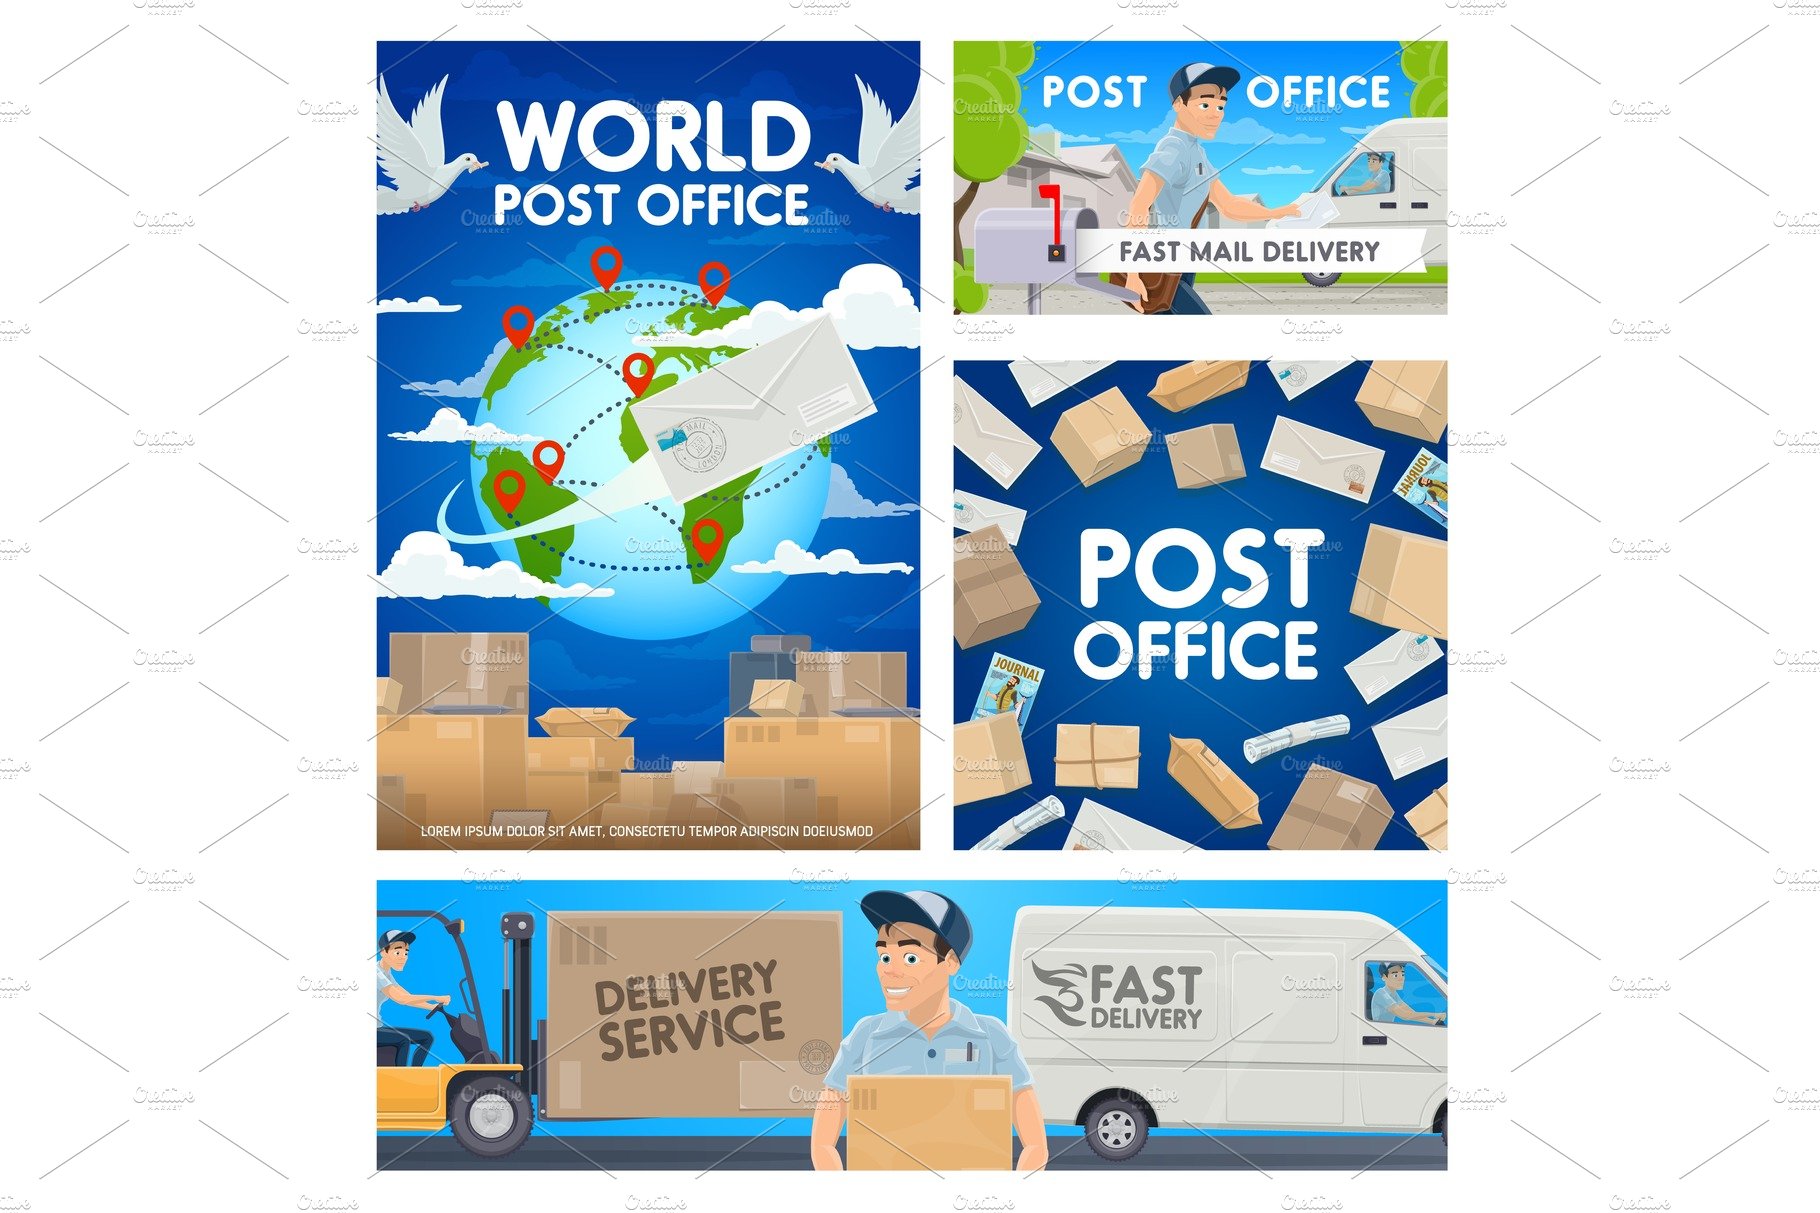 Post office, mail delivery service cover image.